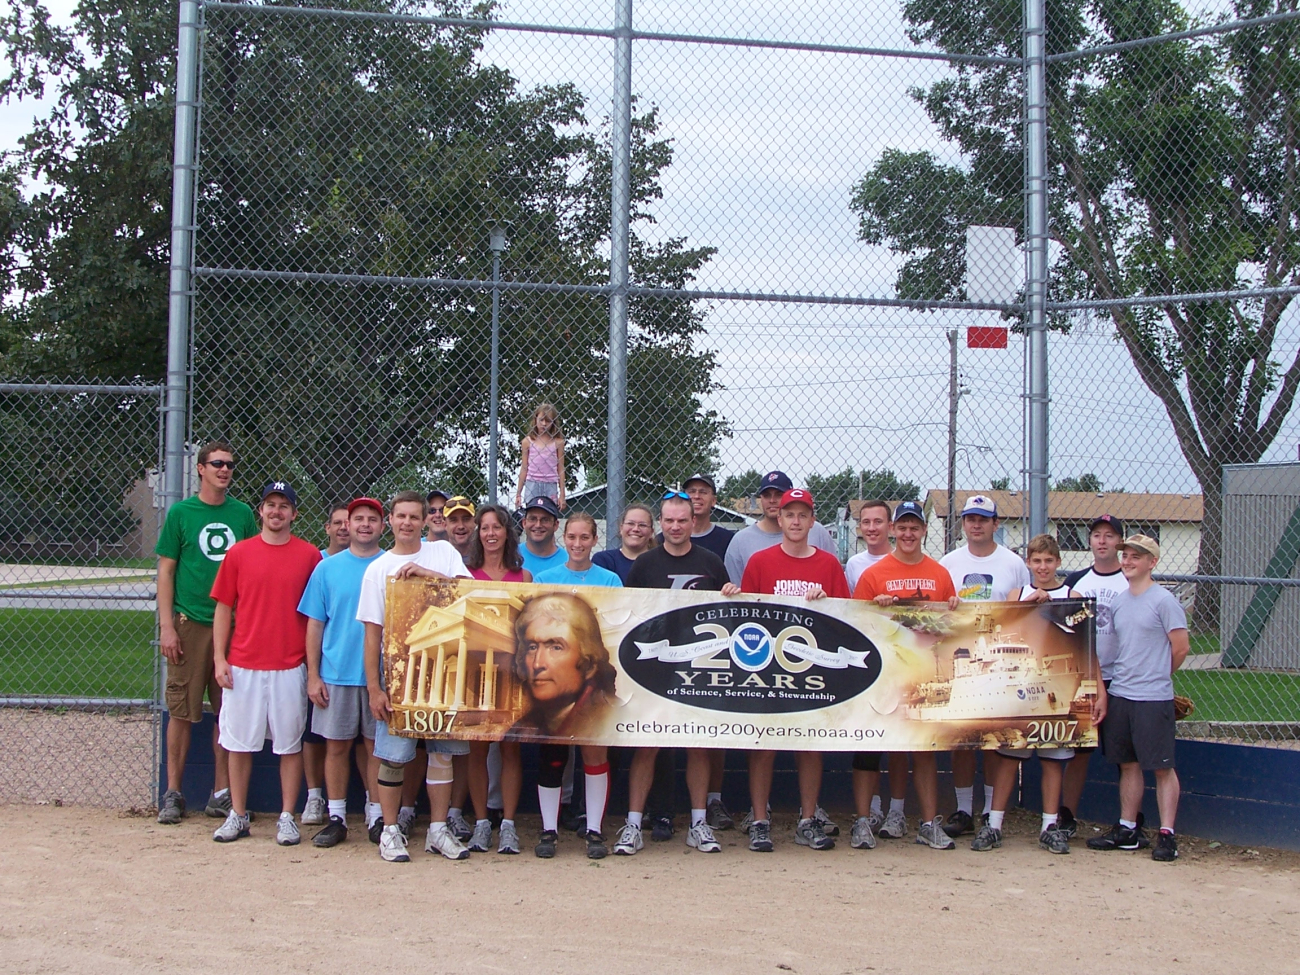 To commemorate NOAA's 200th celebration, National Weather Service employeesand families from the Nebraska Weather Forecasting Offices in Hastings andNorth Platte participated in a friendly game of softball